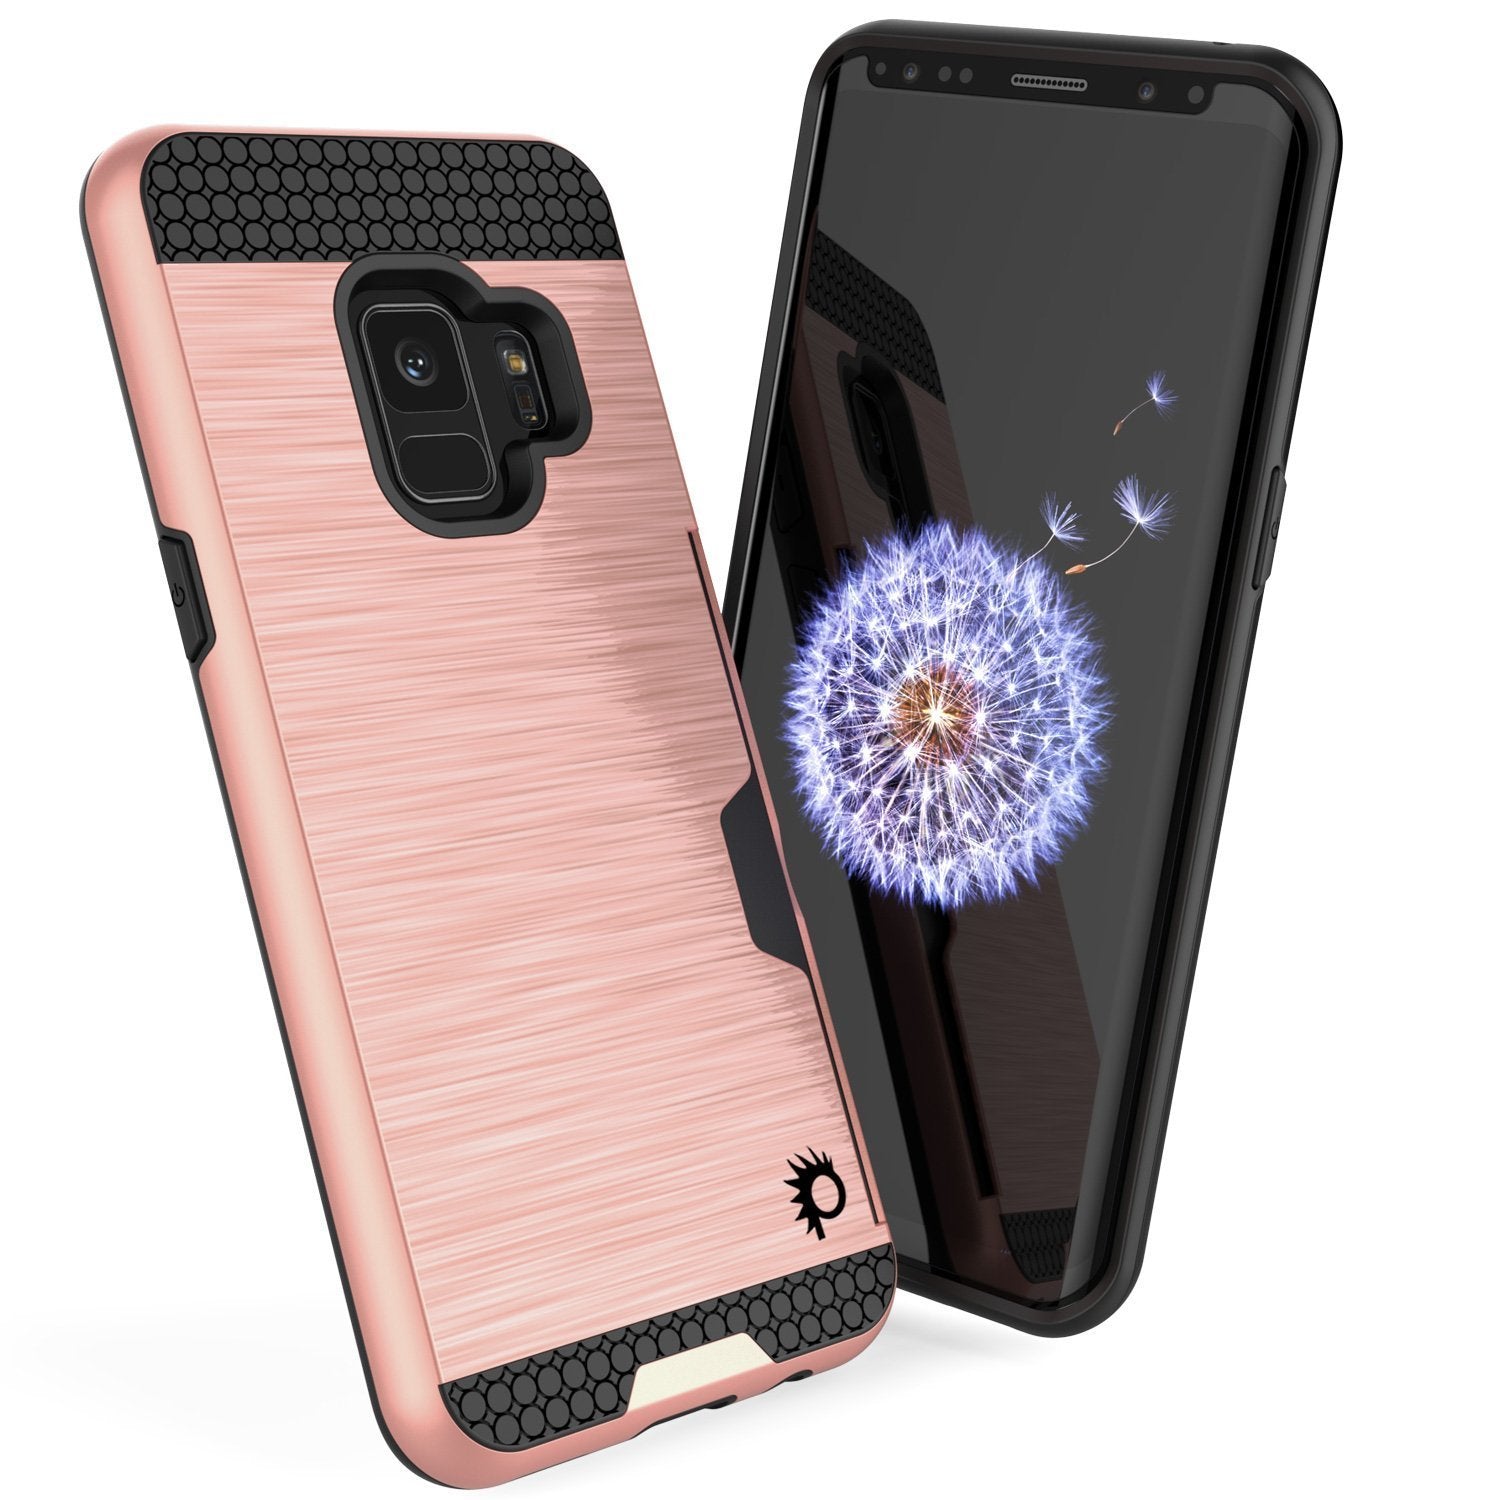 Galaxy S9 Case, PUNKcase [SLOT Series] [Slim Fit] Dual-Layer Armor Cover w/Integrated Anti-Shock System, Credit Card Slot [Rose Gold] - PunkCase NZ